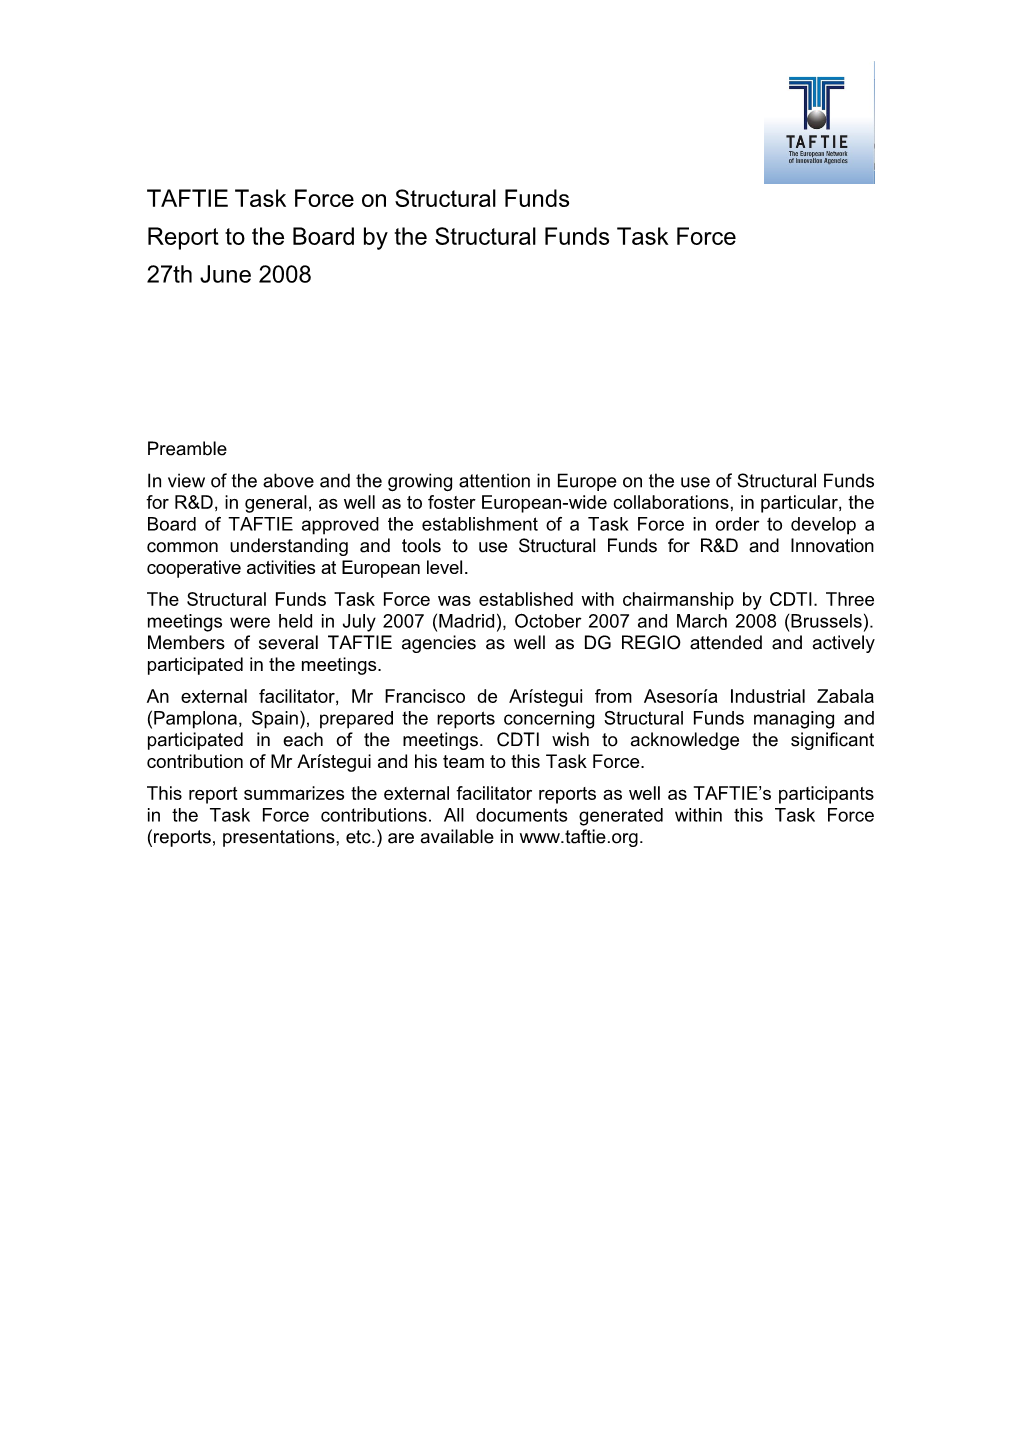 Proposal for a Task Force on Structural Funds